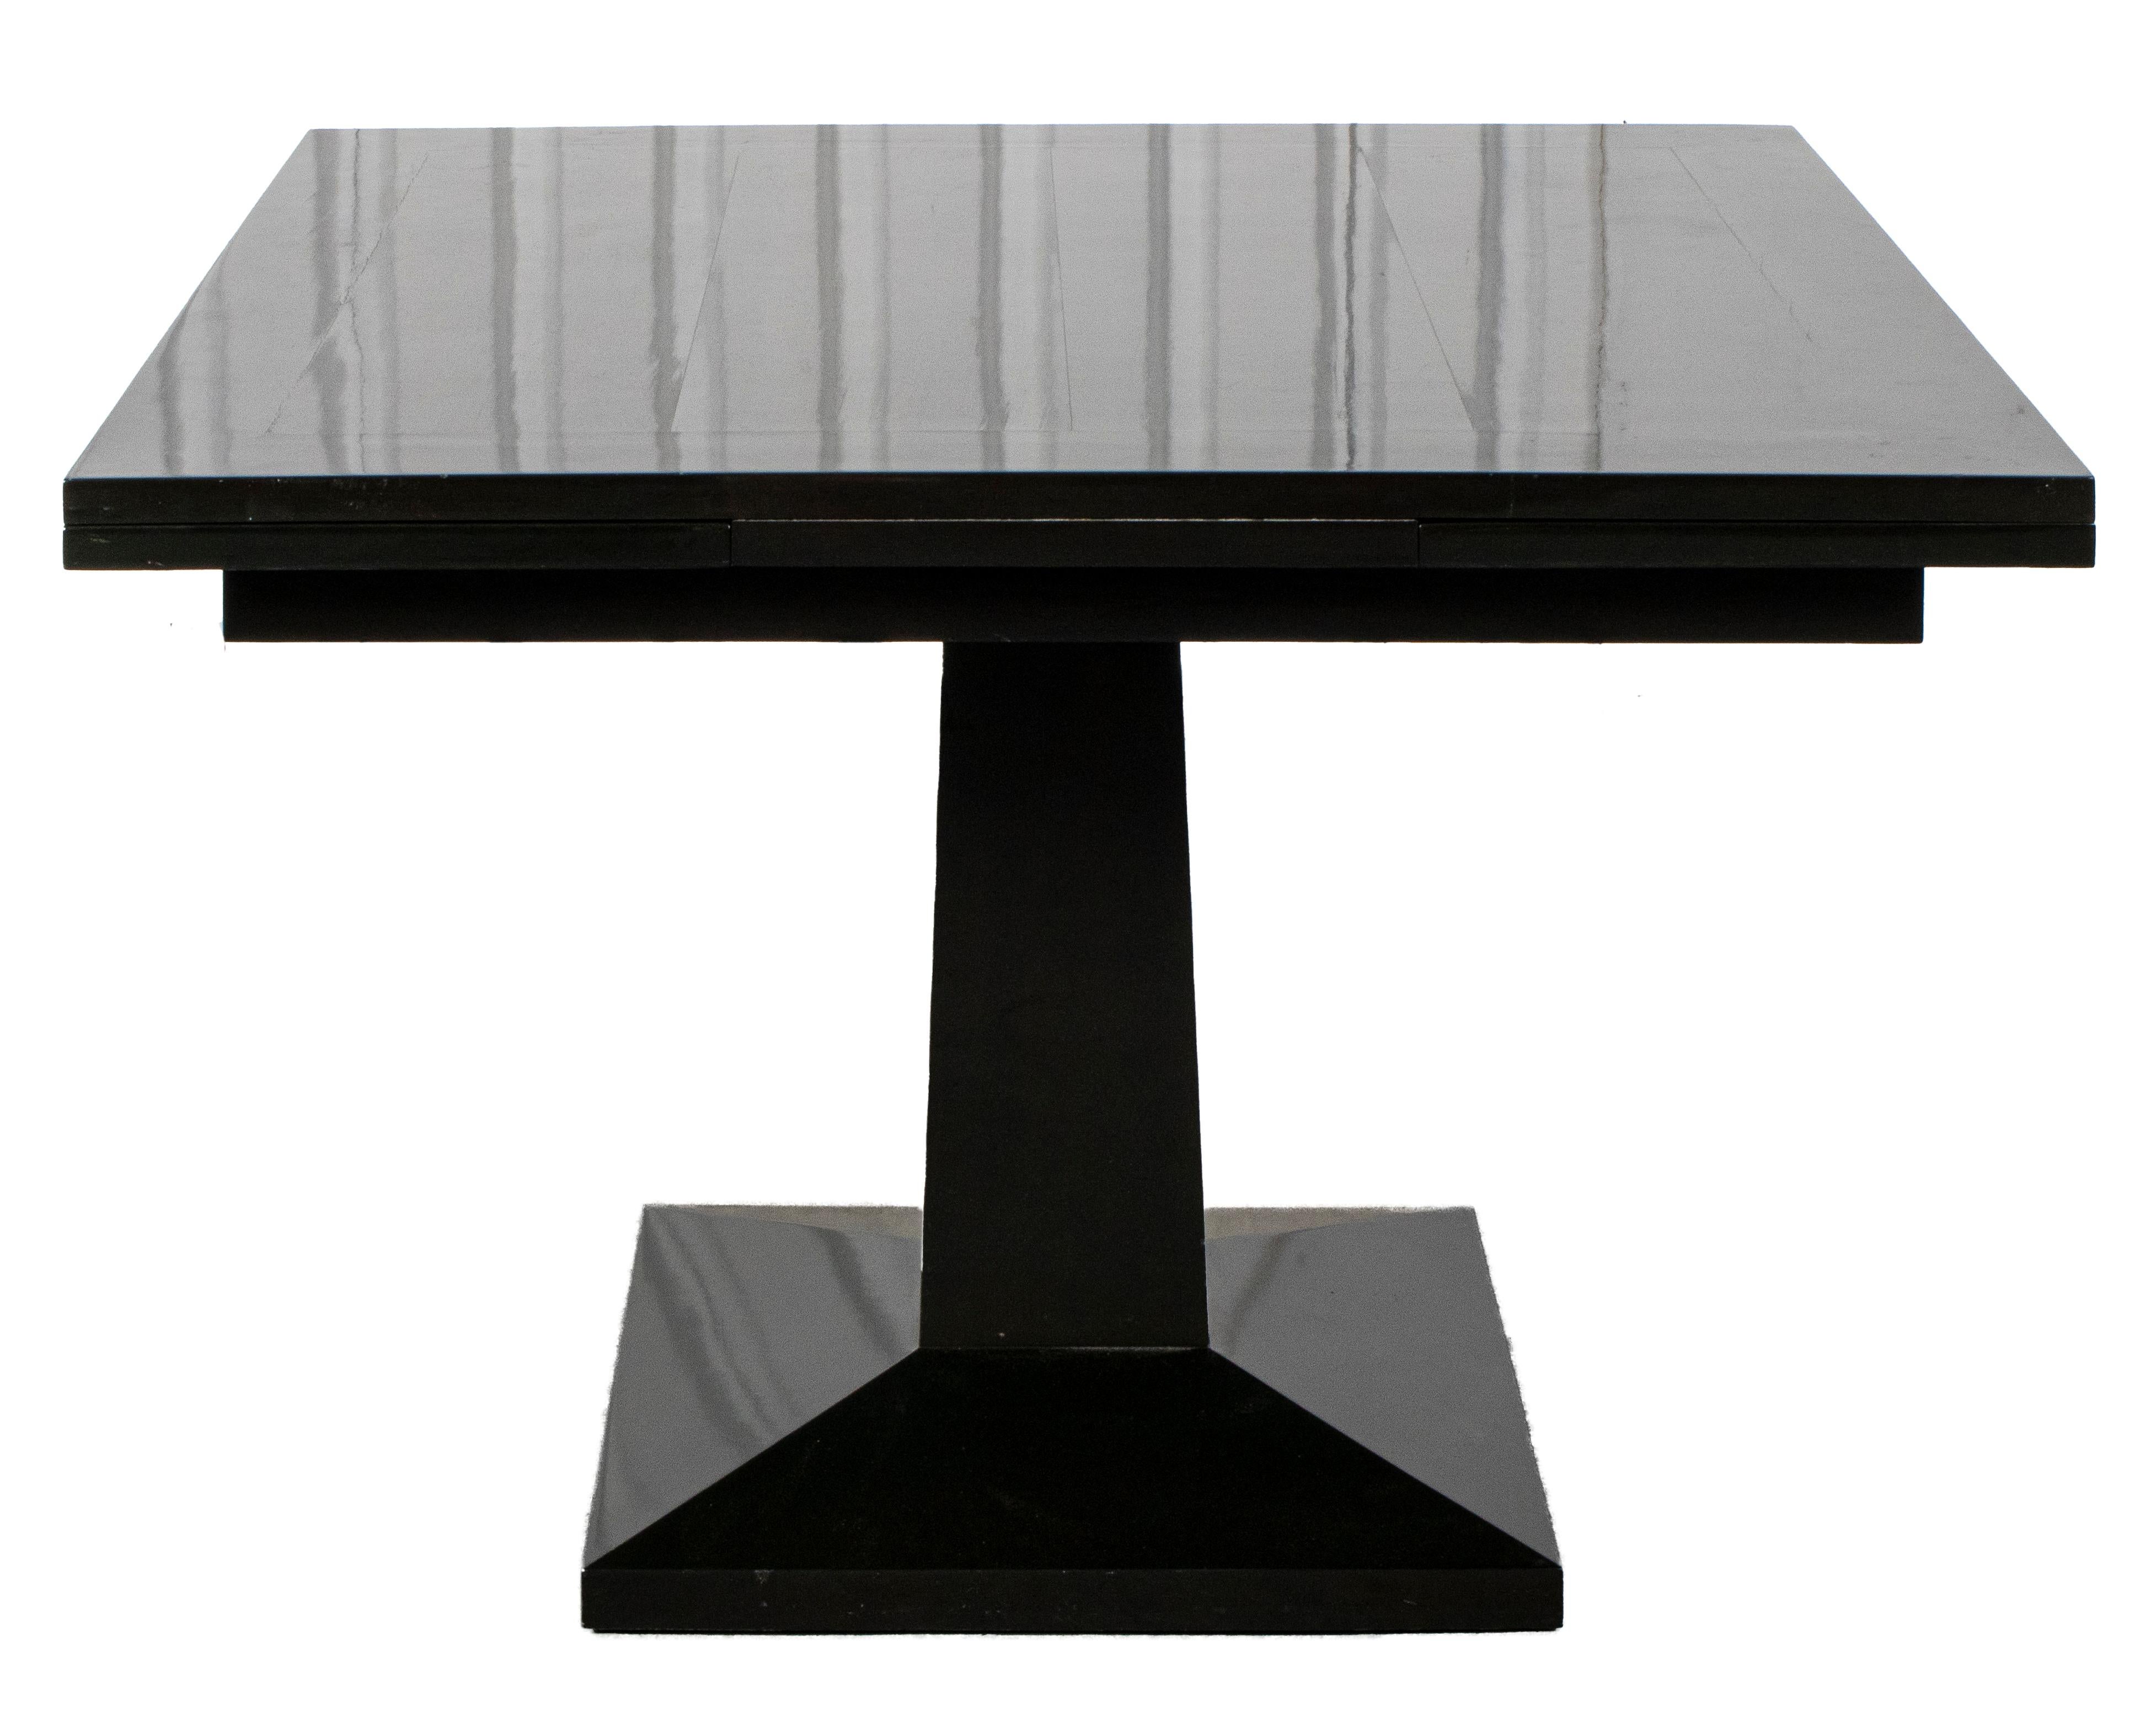 Art Deco revival square dining table with extension leaves, on squared pedestal base.